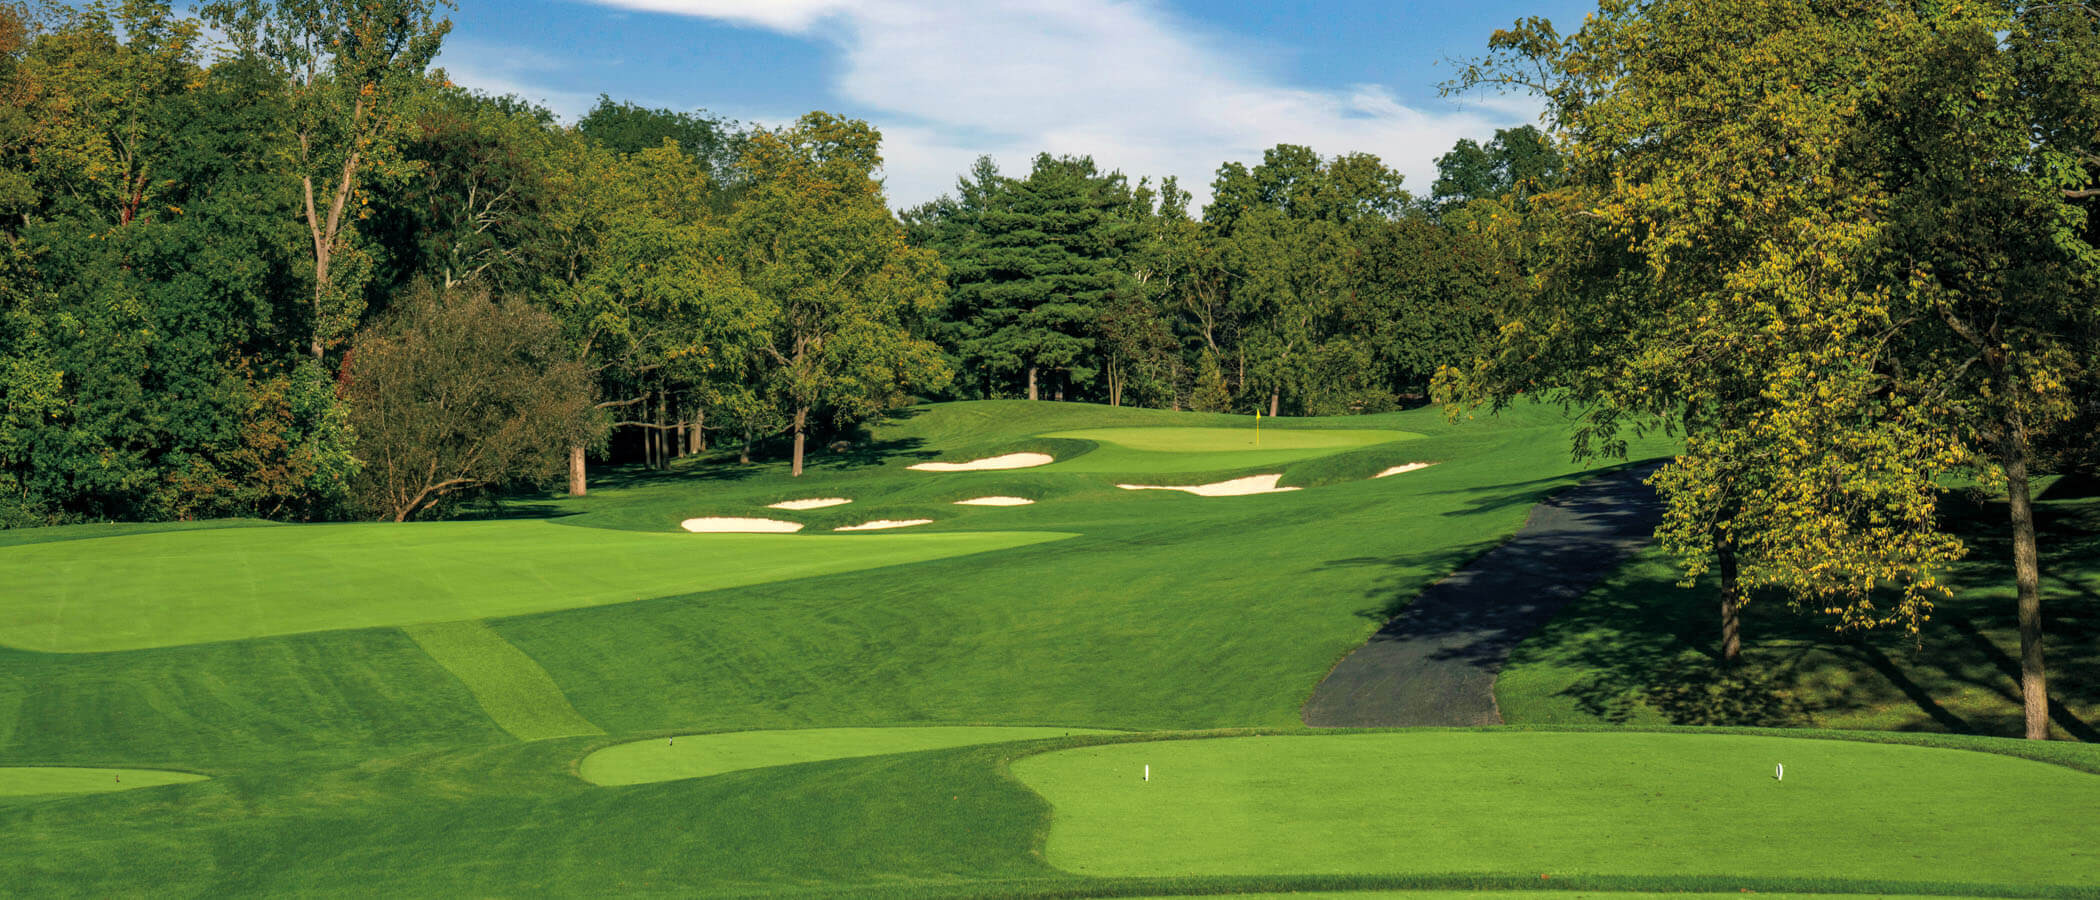 Course Overview » the Memorial Tournament